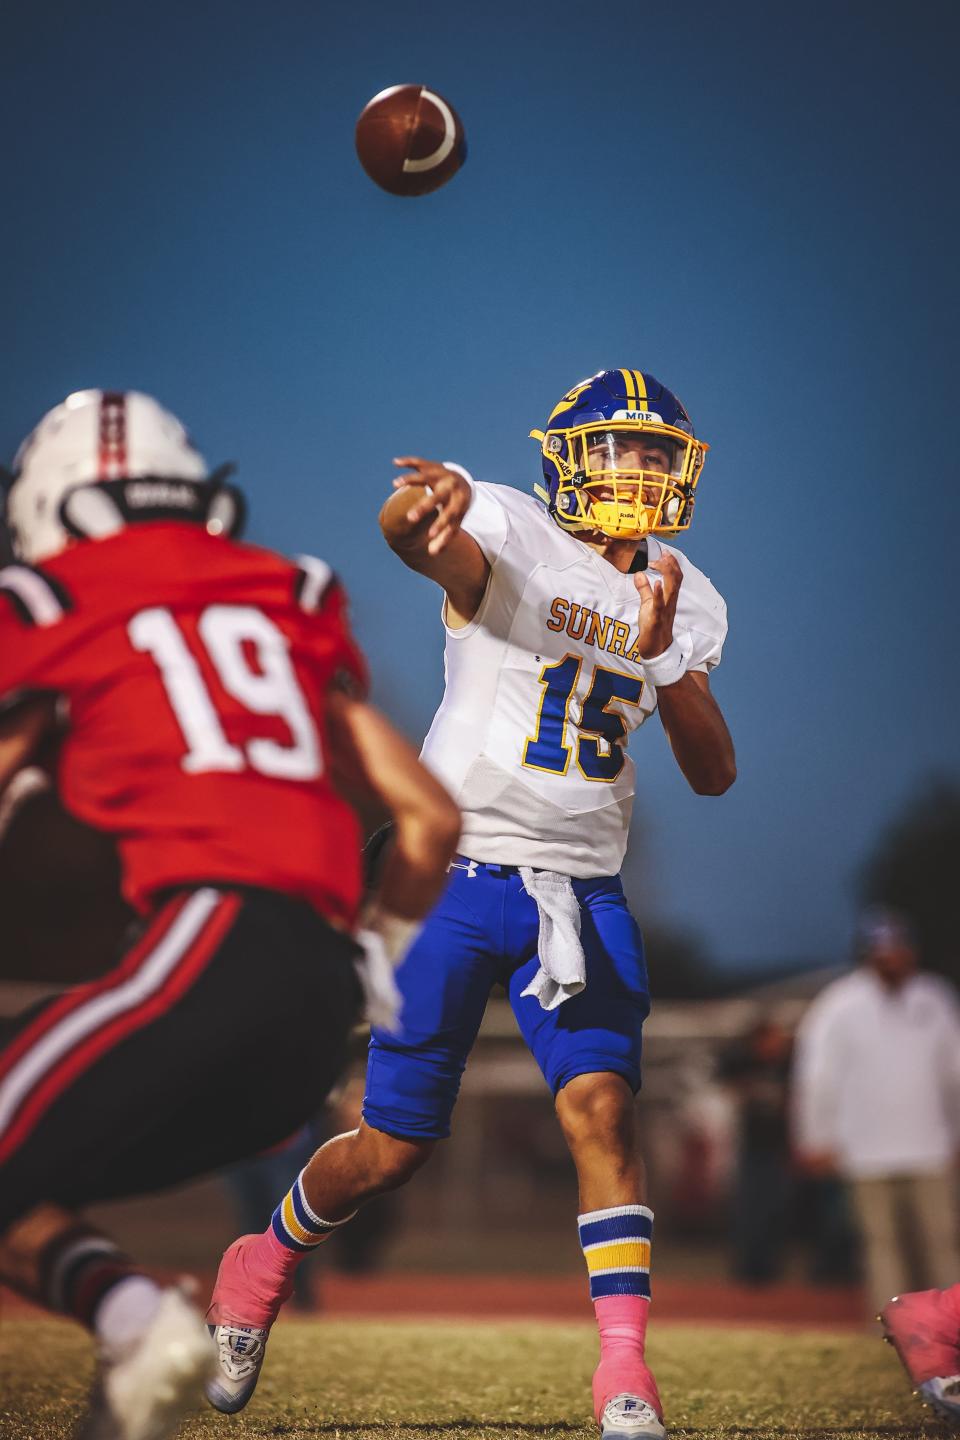 Sunray's Armando Lujan (15) throws a pass against Gruver's Gus Gaillard (19) during a District 3-2A Division II game Friday, Oct. 29, 2021 at Greyhound Stadium in Gruver, Texas.